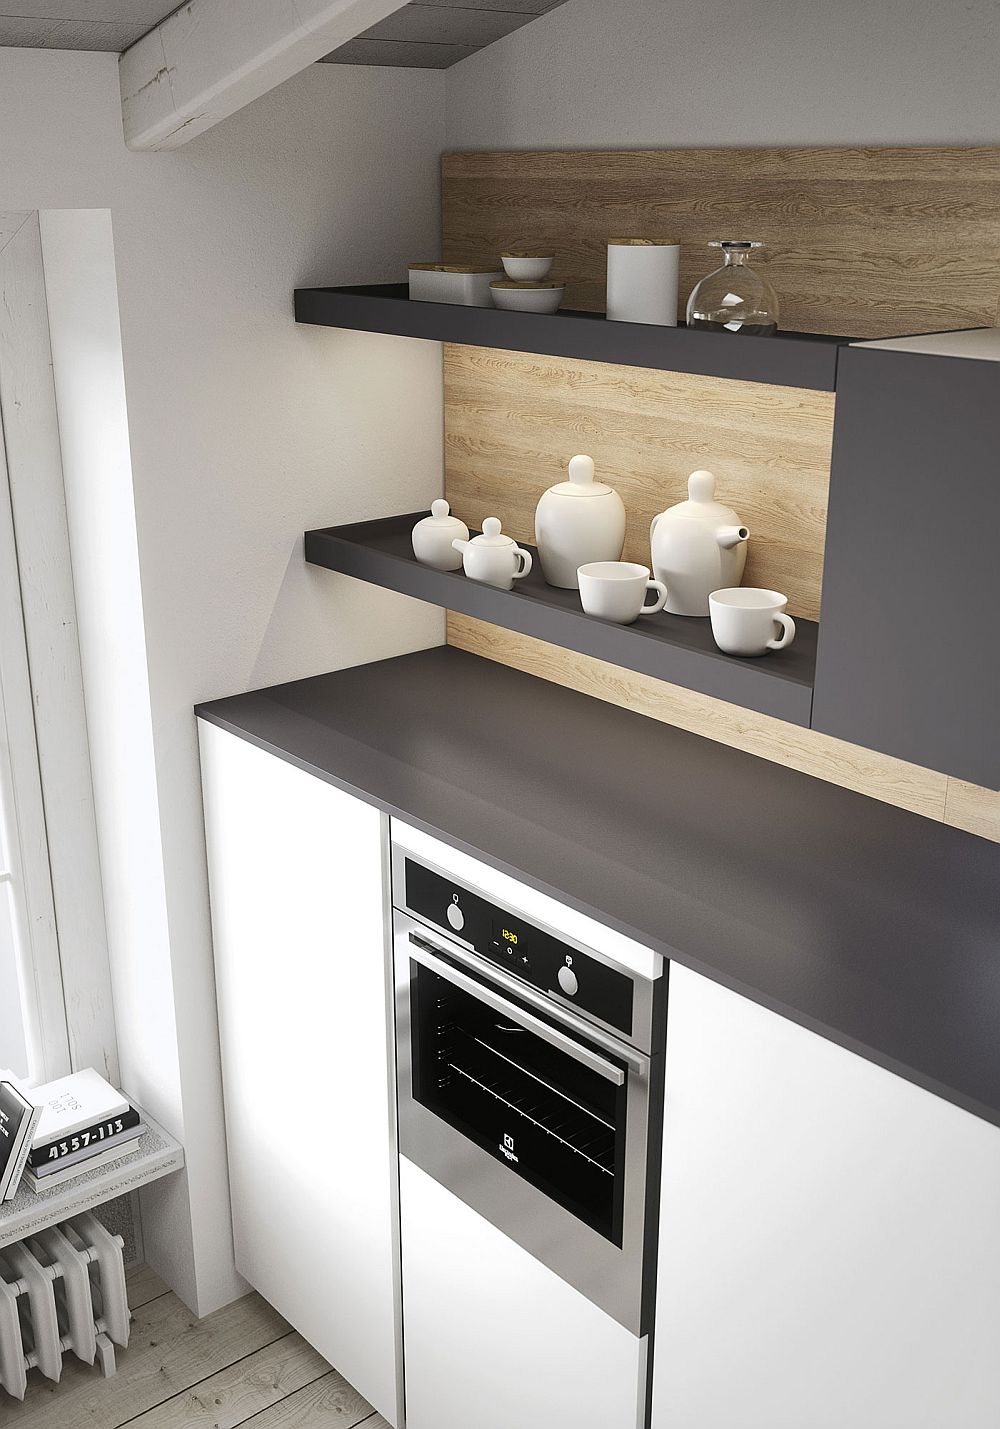 Combining open shelves with cabinets gives a smart and stylish kitchen